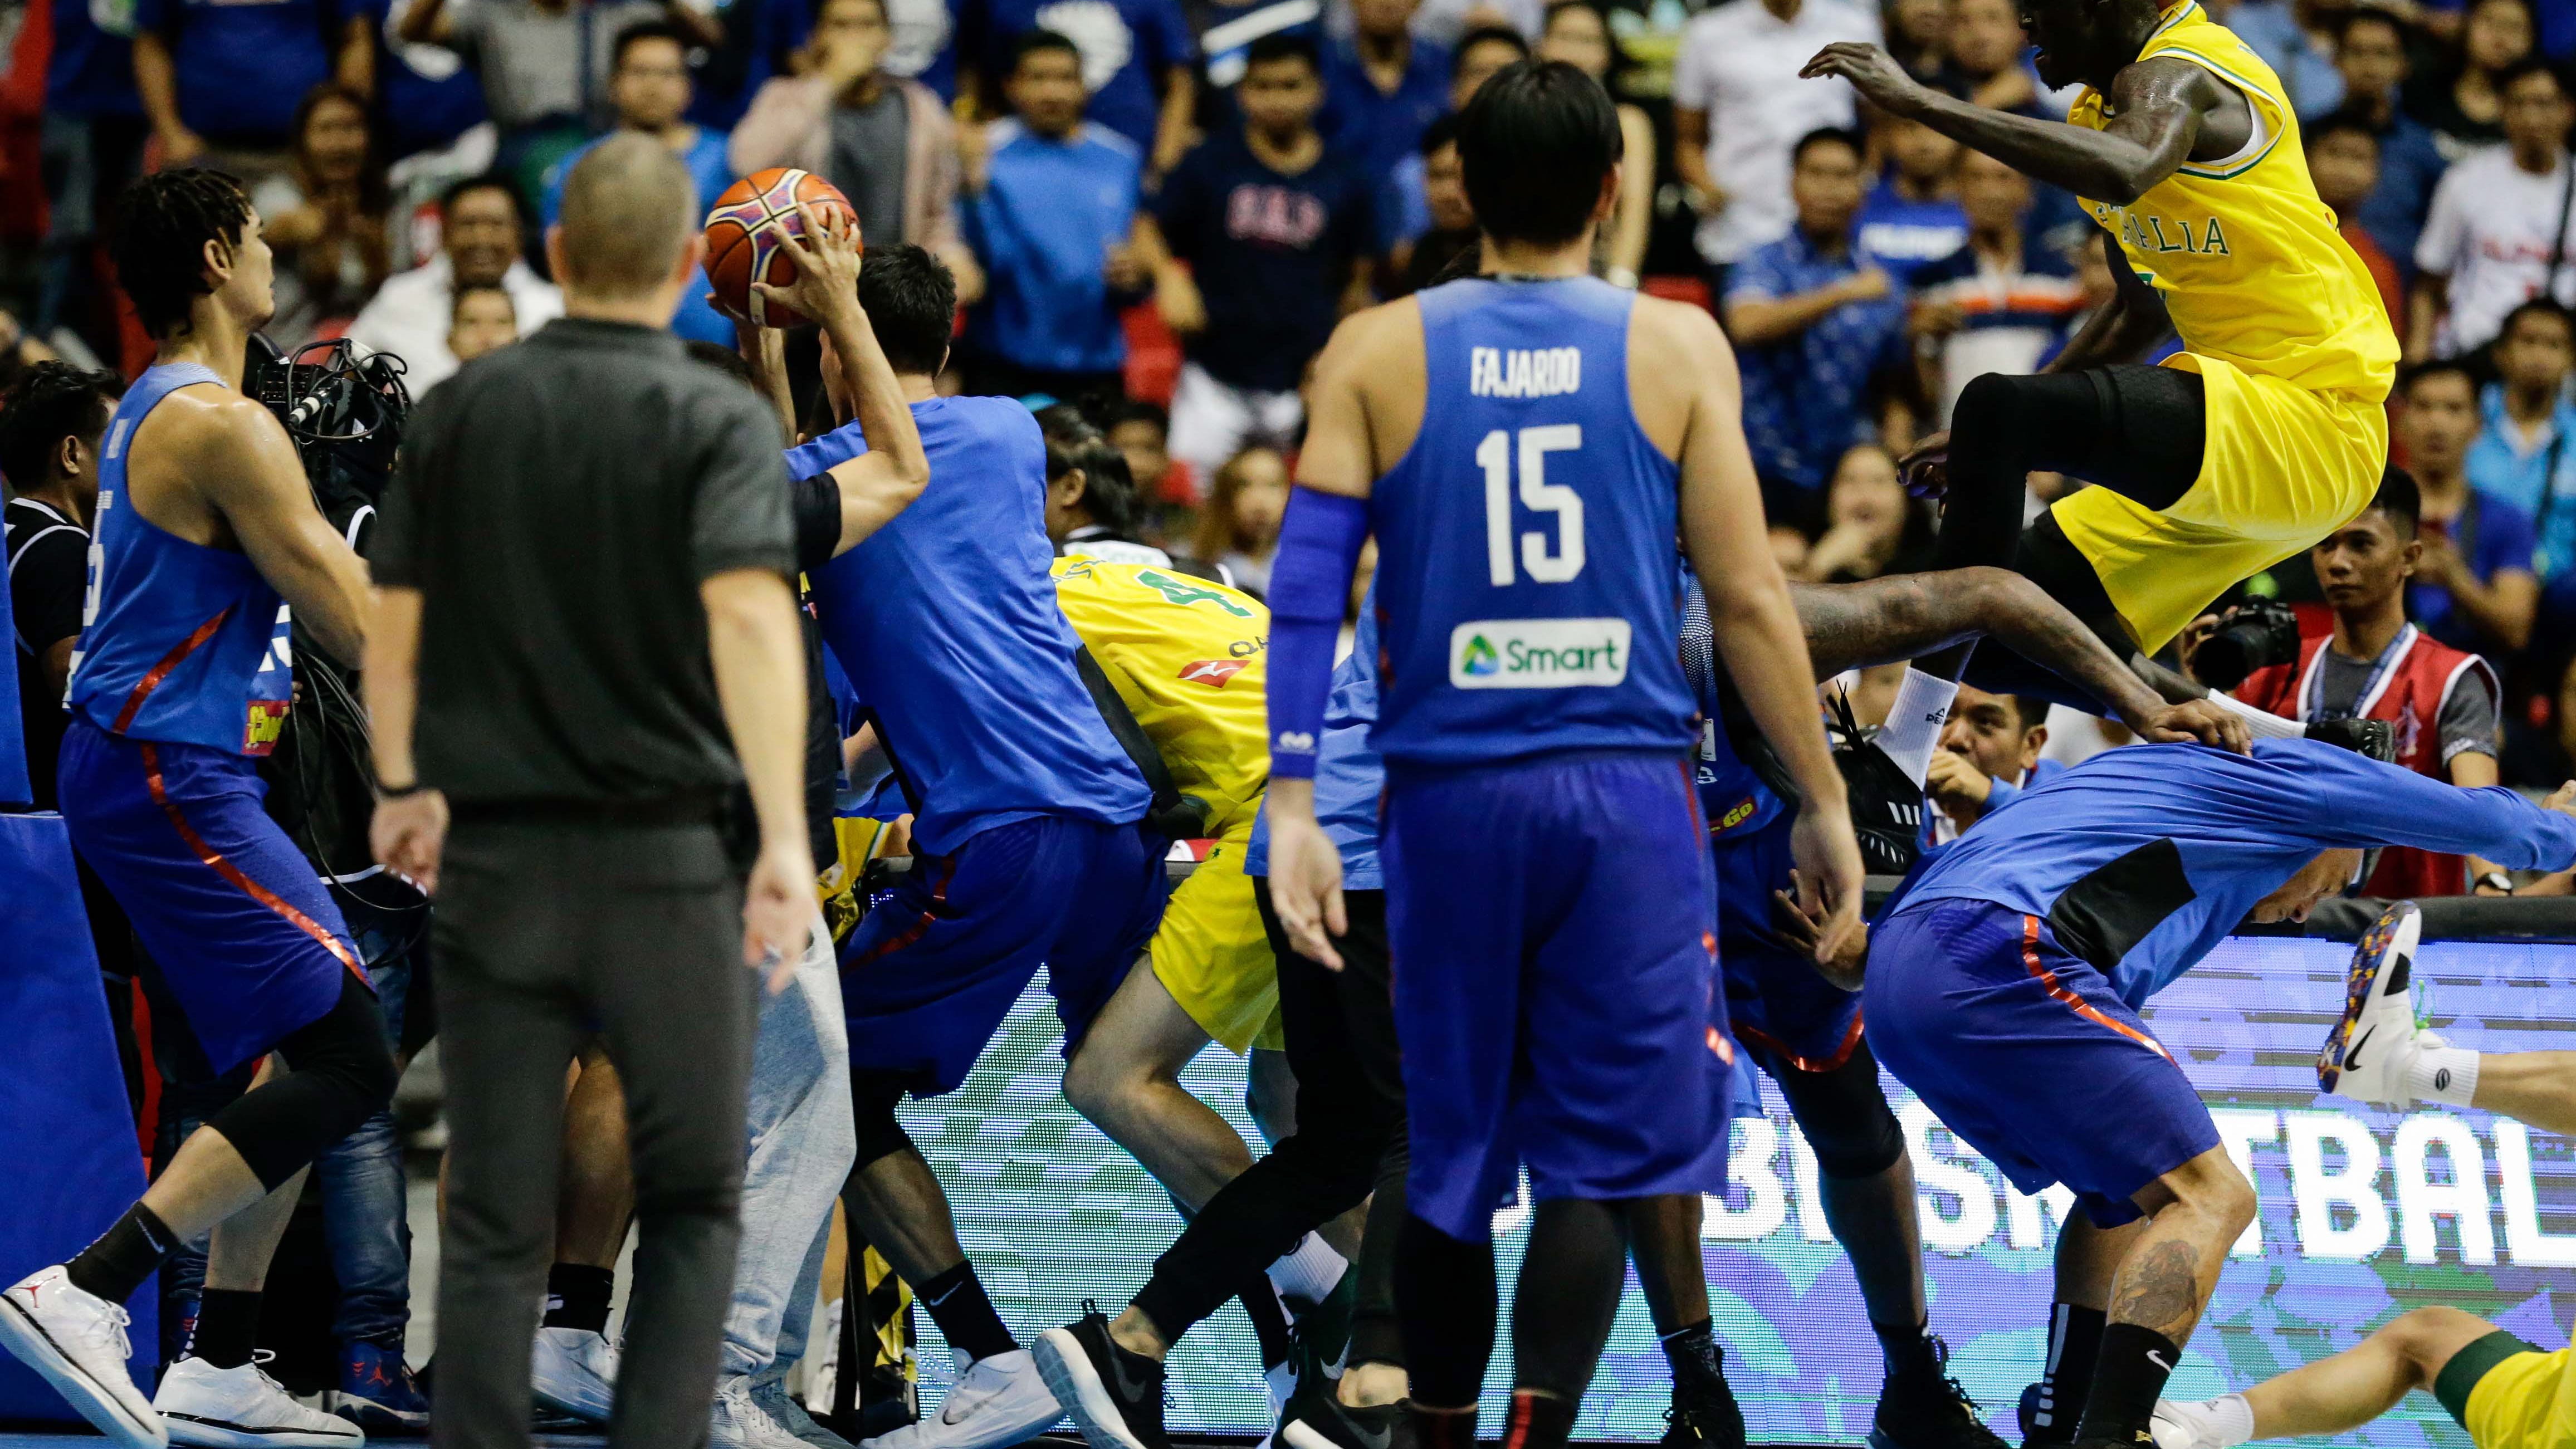 Australia Philippines Brawl At Basketball Game Leads To 13 Ejections - brawl stars basketball tips